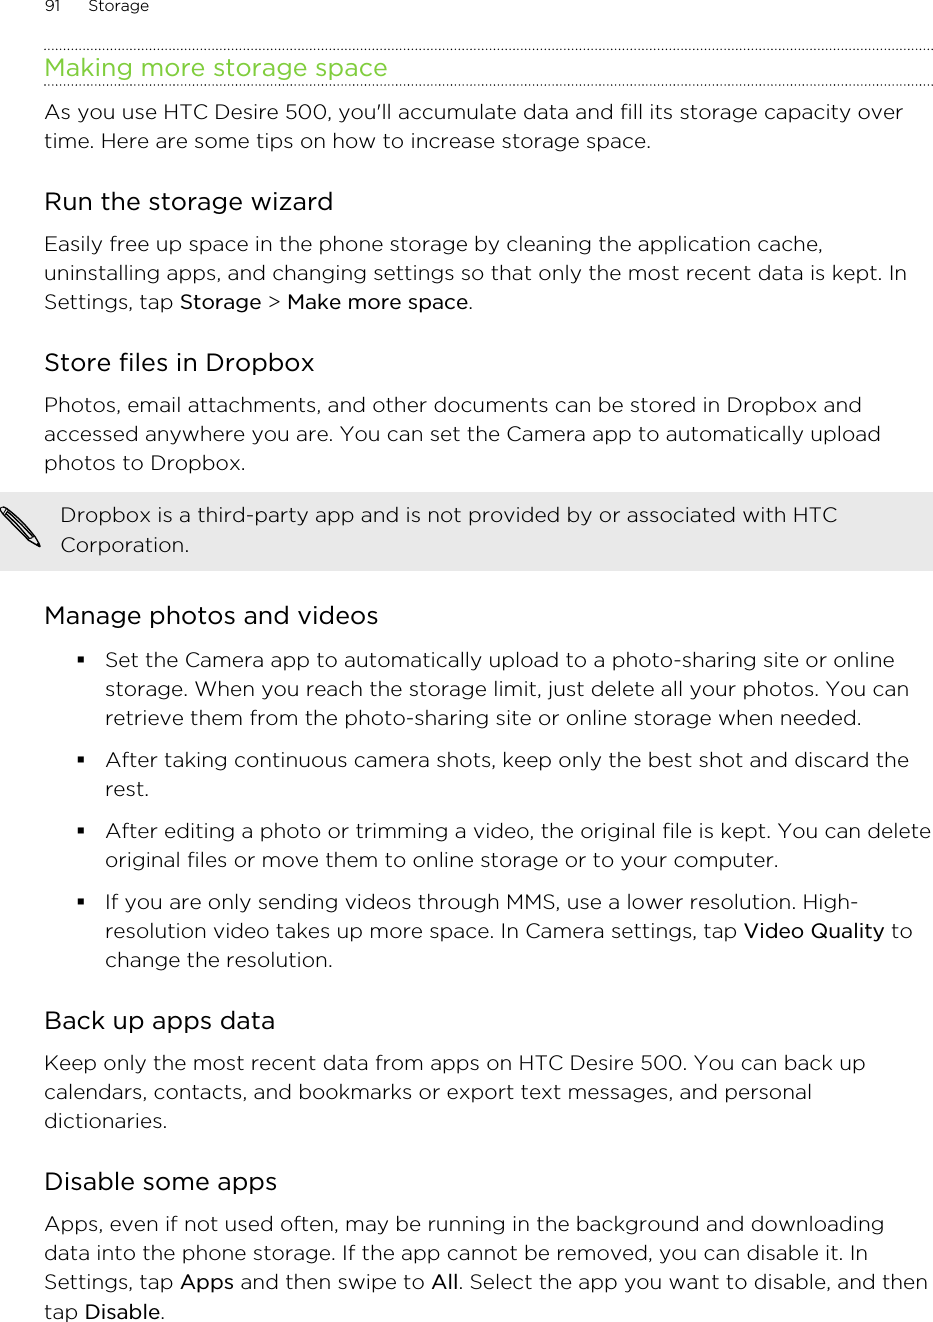 Making more storage spaceAs you use HTC Desire 500, you&apos;ll accumulate data and fill its storage capacity overtime. Here are some tips on how to increase storage space.Run the storage wizardEasily free up space in the phone storage by cleaning the application cache,uninstalling apps, and changing settings so that only the most recent data is kept. InSettings, tap Storage &gt; Make more space.Store files in DropboxPhotos, email attachments, and other documents can be stored in Dropbox andaccessed anywhere you are. You can set the Camera app to automatically uploadphotos to Dropbox.Dropbox is a third-party app and is not provided by or associated with HTCCorporation.Manage photos and videos§Set the Camera app to automatically upload to a photo-sharing site or onlinestorage. When you reach the storage limit, just delete all your photos. You canretrieve them from the photo-sharing site or online storage when needed.§After taking continuous camera shots, keep only the best shot and discard therest.§After editing a photo or trimming a video, the original file is kept. You can deleteoriginal files or move them to online storage or to your computer.§If you are only sending videos through MMS, use a lower resolution. High-resolution video takes up more space. In Camera settings, tap Video Quality tochange the resolution.Back up apps dataKeep only the most recent data from apps on HTC Desire 500. You can back upcalendars, contacts, and bookmarks or export text messages, and personaldictionaries.Disable some appsApps, even if not used often, may be running in the background and downloadingdata into the phone storage. If the app cannot be removed, you can disable it. InSettings, tap Apps and then swipe to All. Select the app you want to disable, and thentap Disable.91 Storage